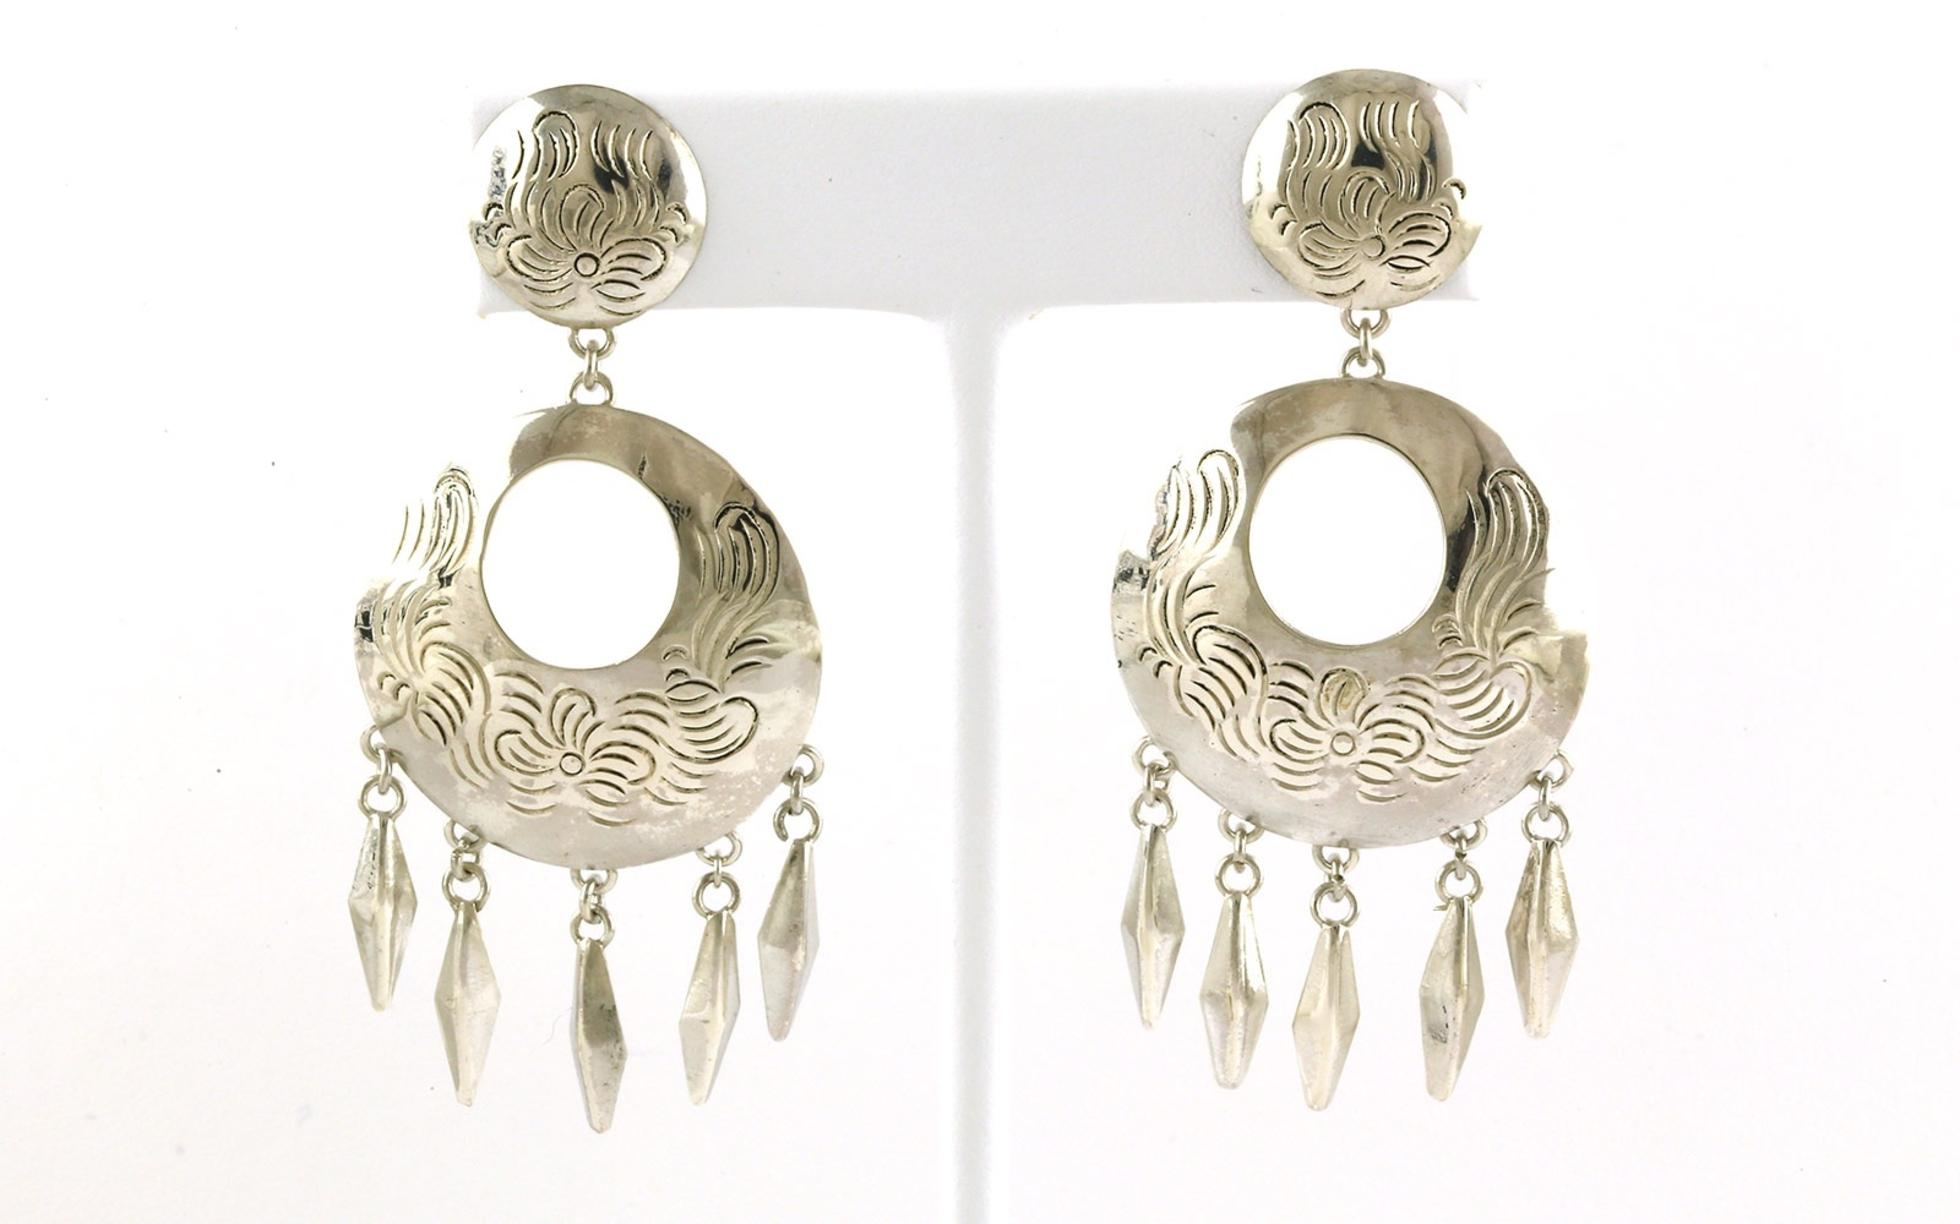 Estate Piece: Circles and Dangles Earrings with Engraved Line Details in Sterling Silver